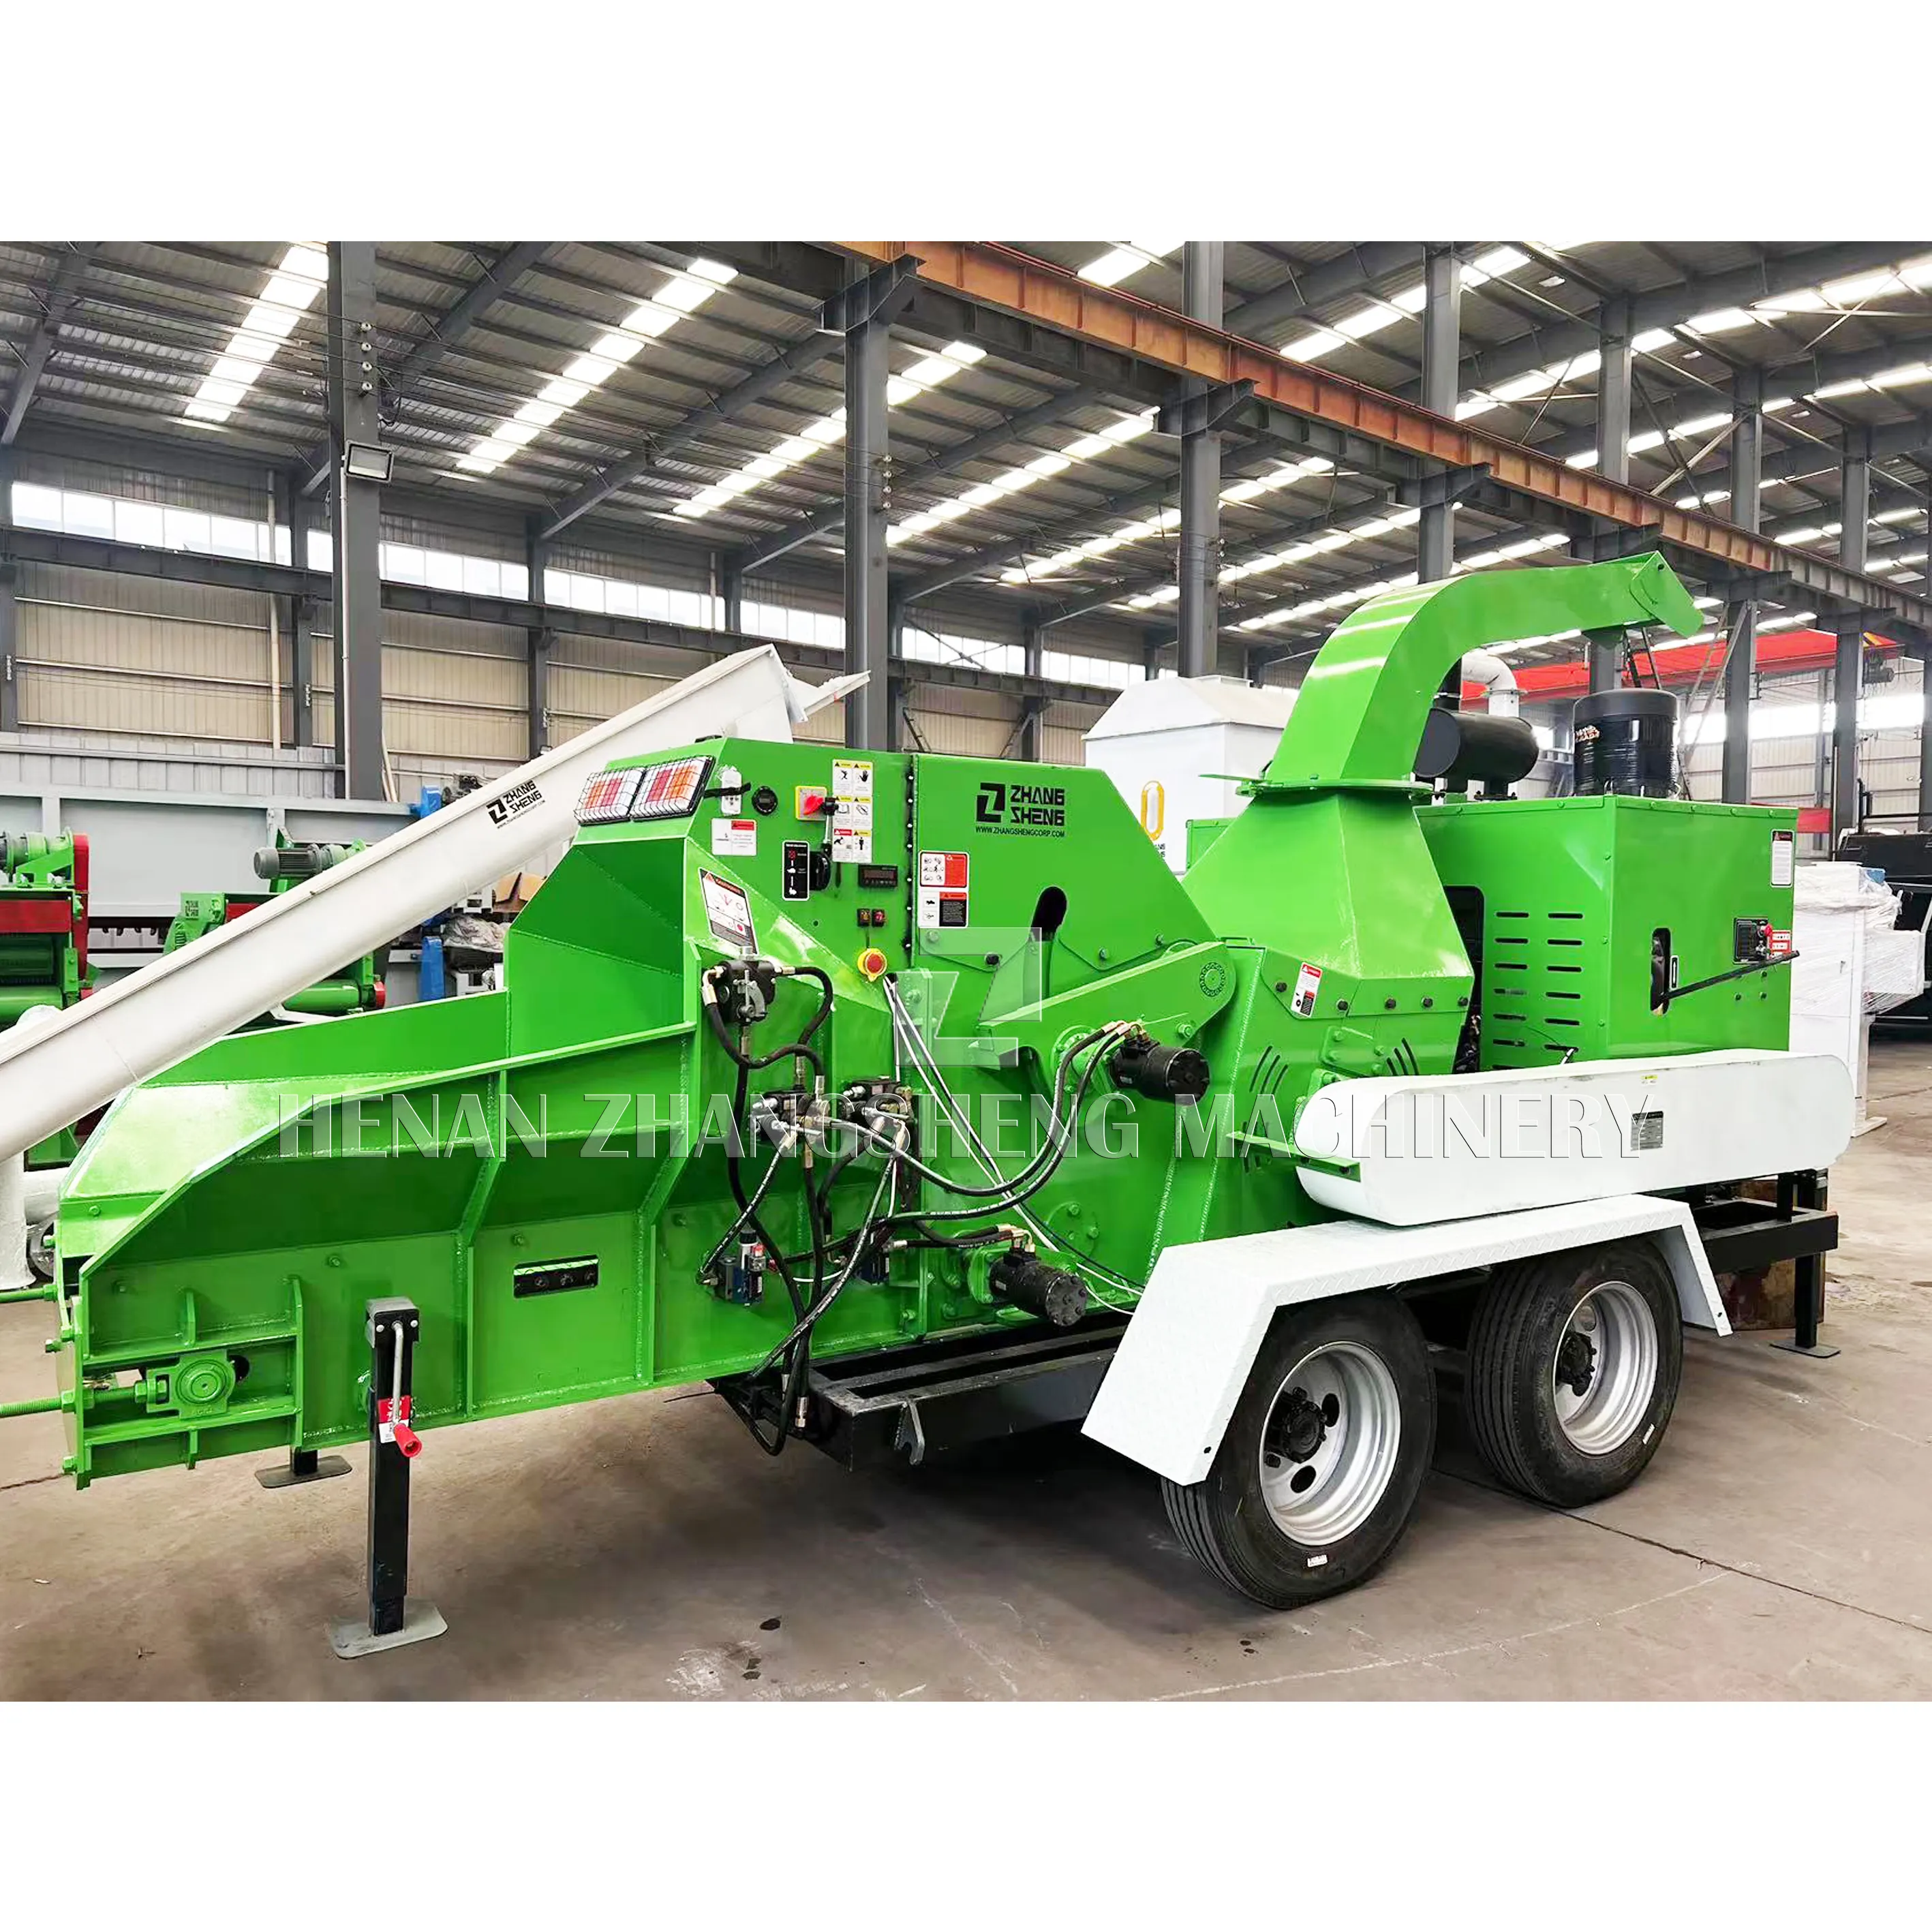 tree grinder on tracks forest chipper chopper to motor pallets wood chipping machinery s grinder mobile bamboo powder machine